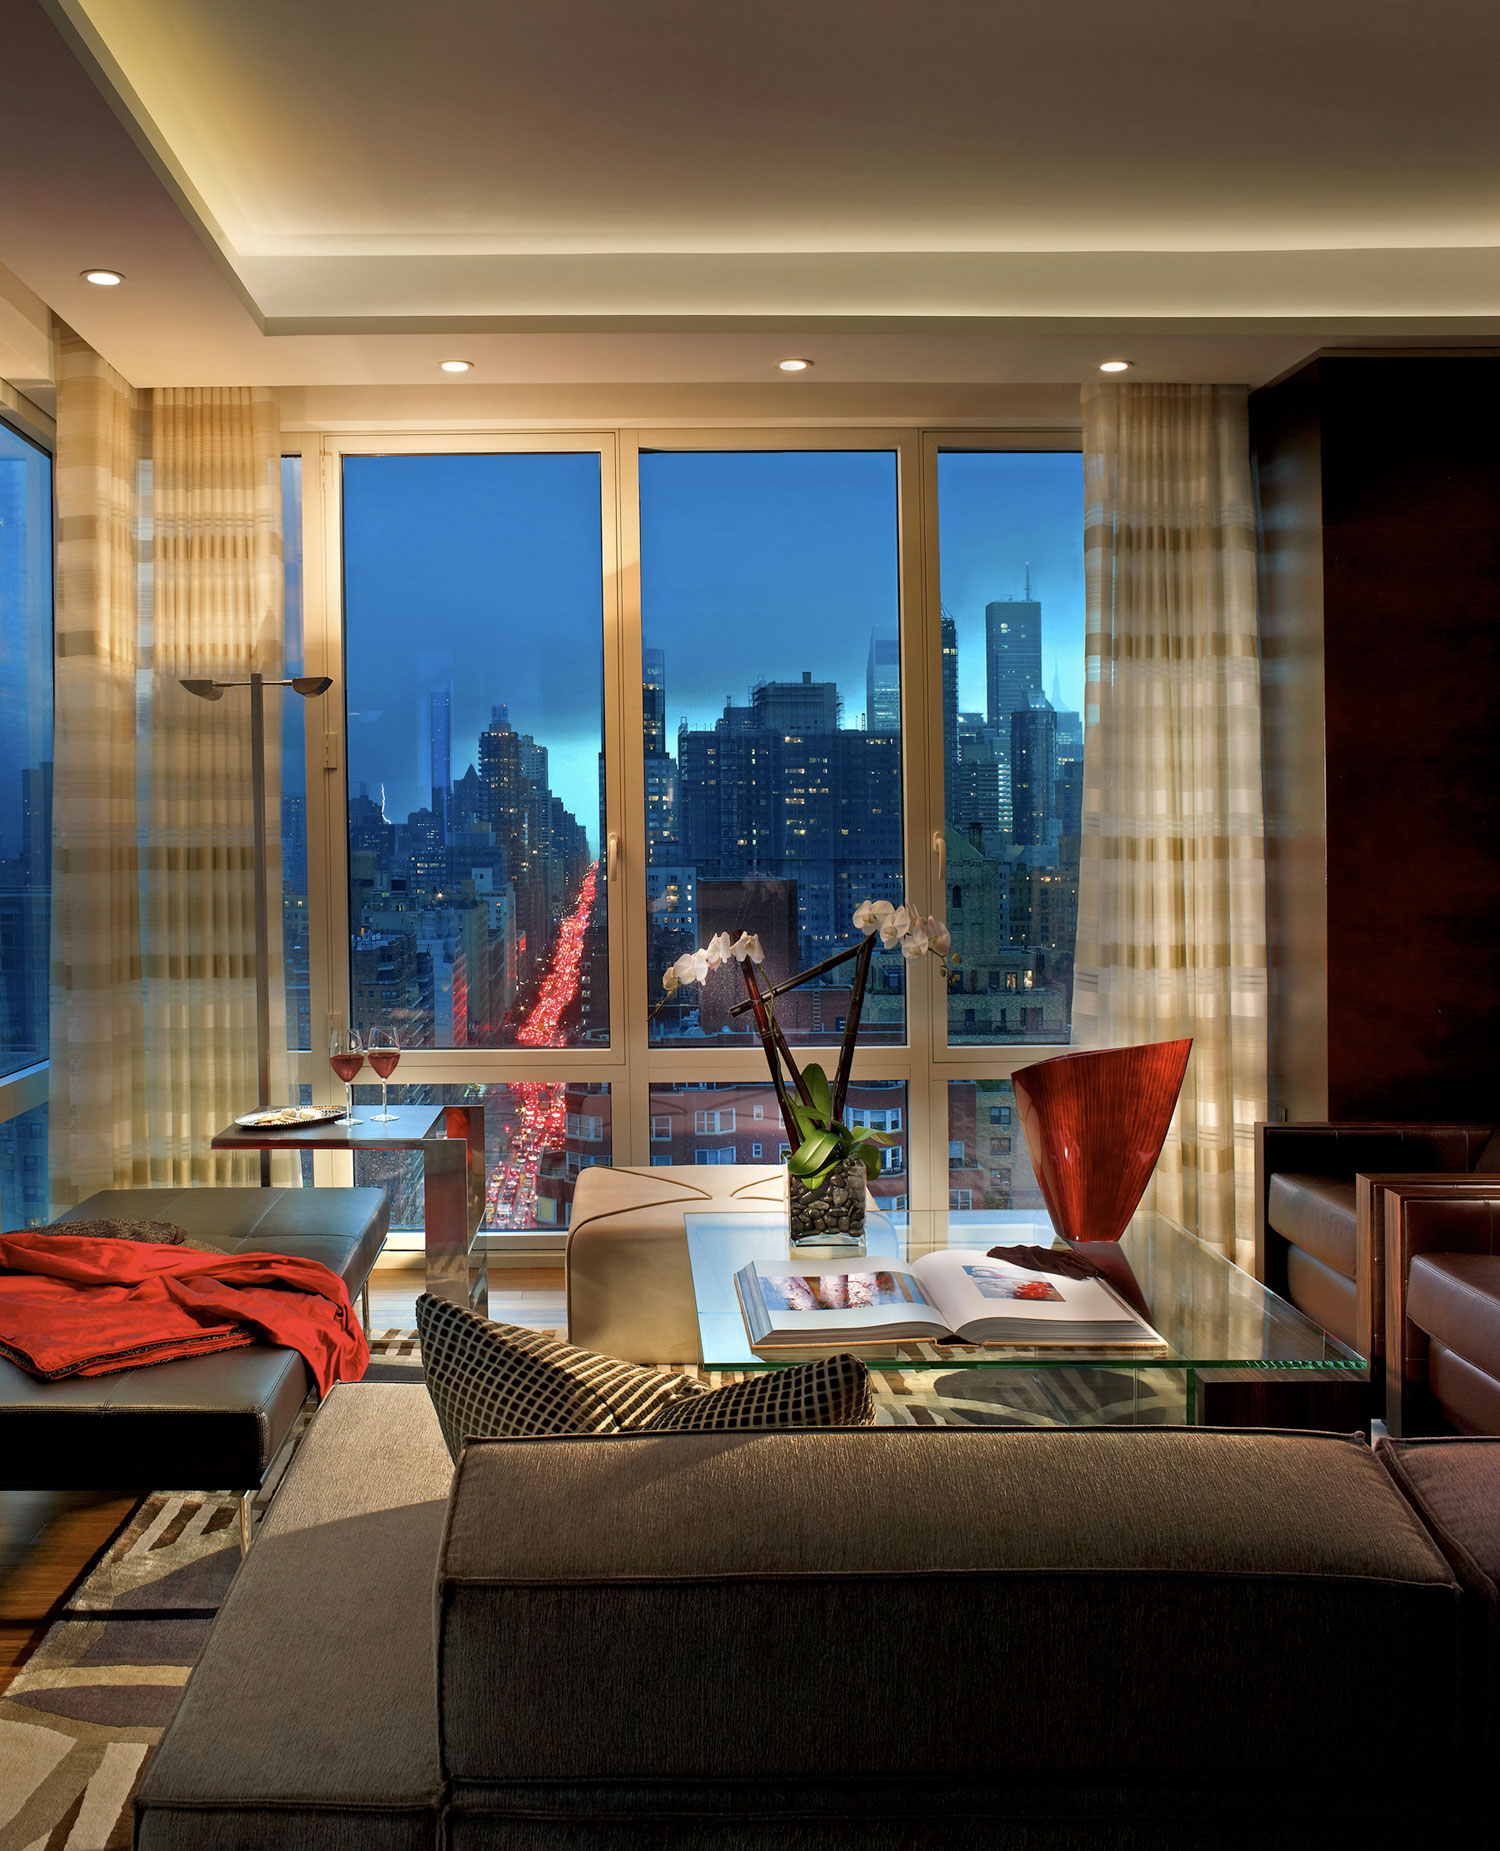 beautiful-view-of-city-skyline-from-modern-living-room-penthouse-apartment-New-York-with-cozy-seating-design-ideas.